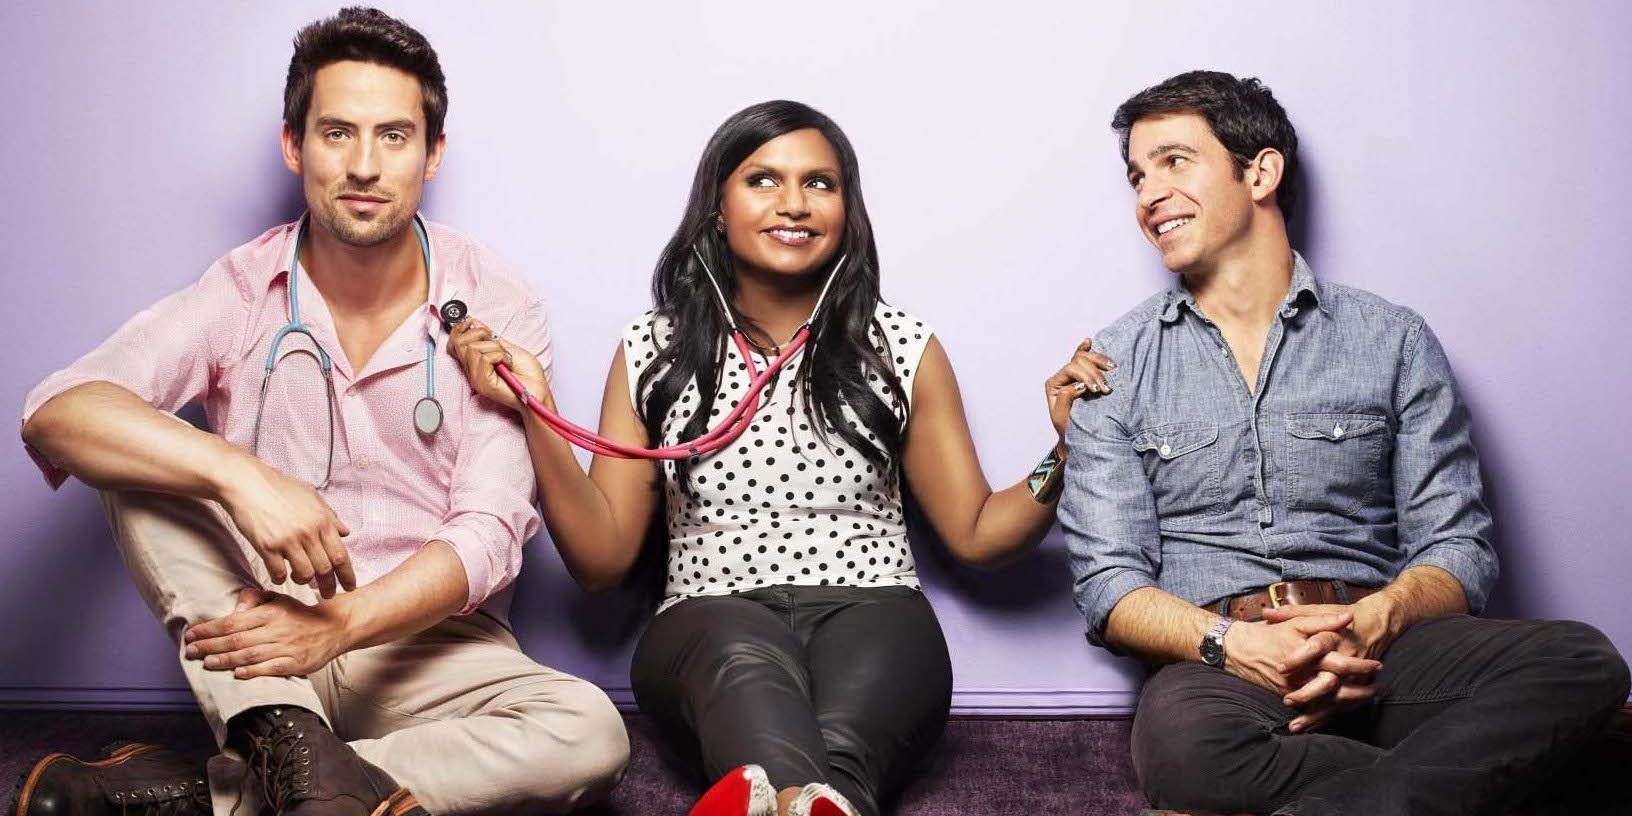 Where To Find The Cast Of The Mindy Project In 2022